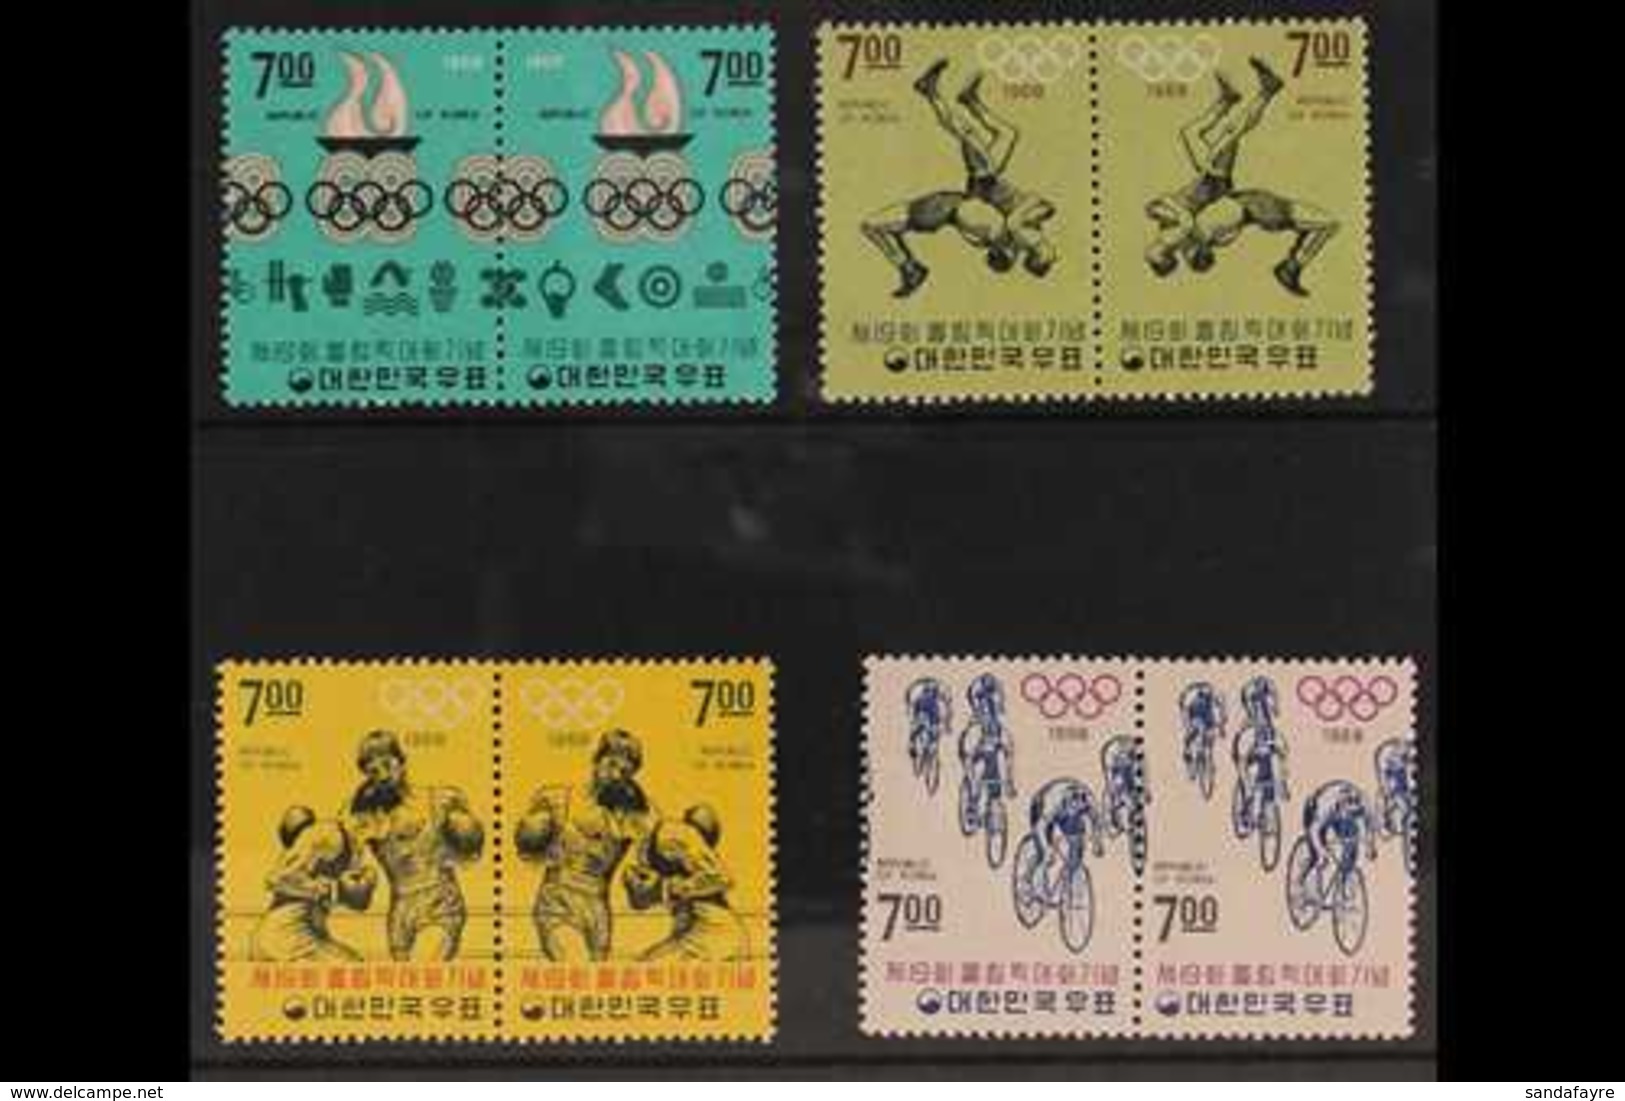 1968 Mexico Olympic Games Complete Set, SG 760/767, In Horizontal Se-tenant Pairs, Never Hinged Mint. (4 Pairs, 8 Stamps - Korea, South